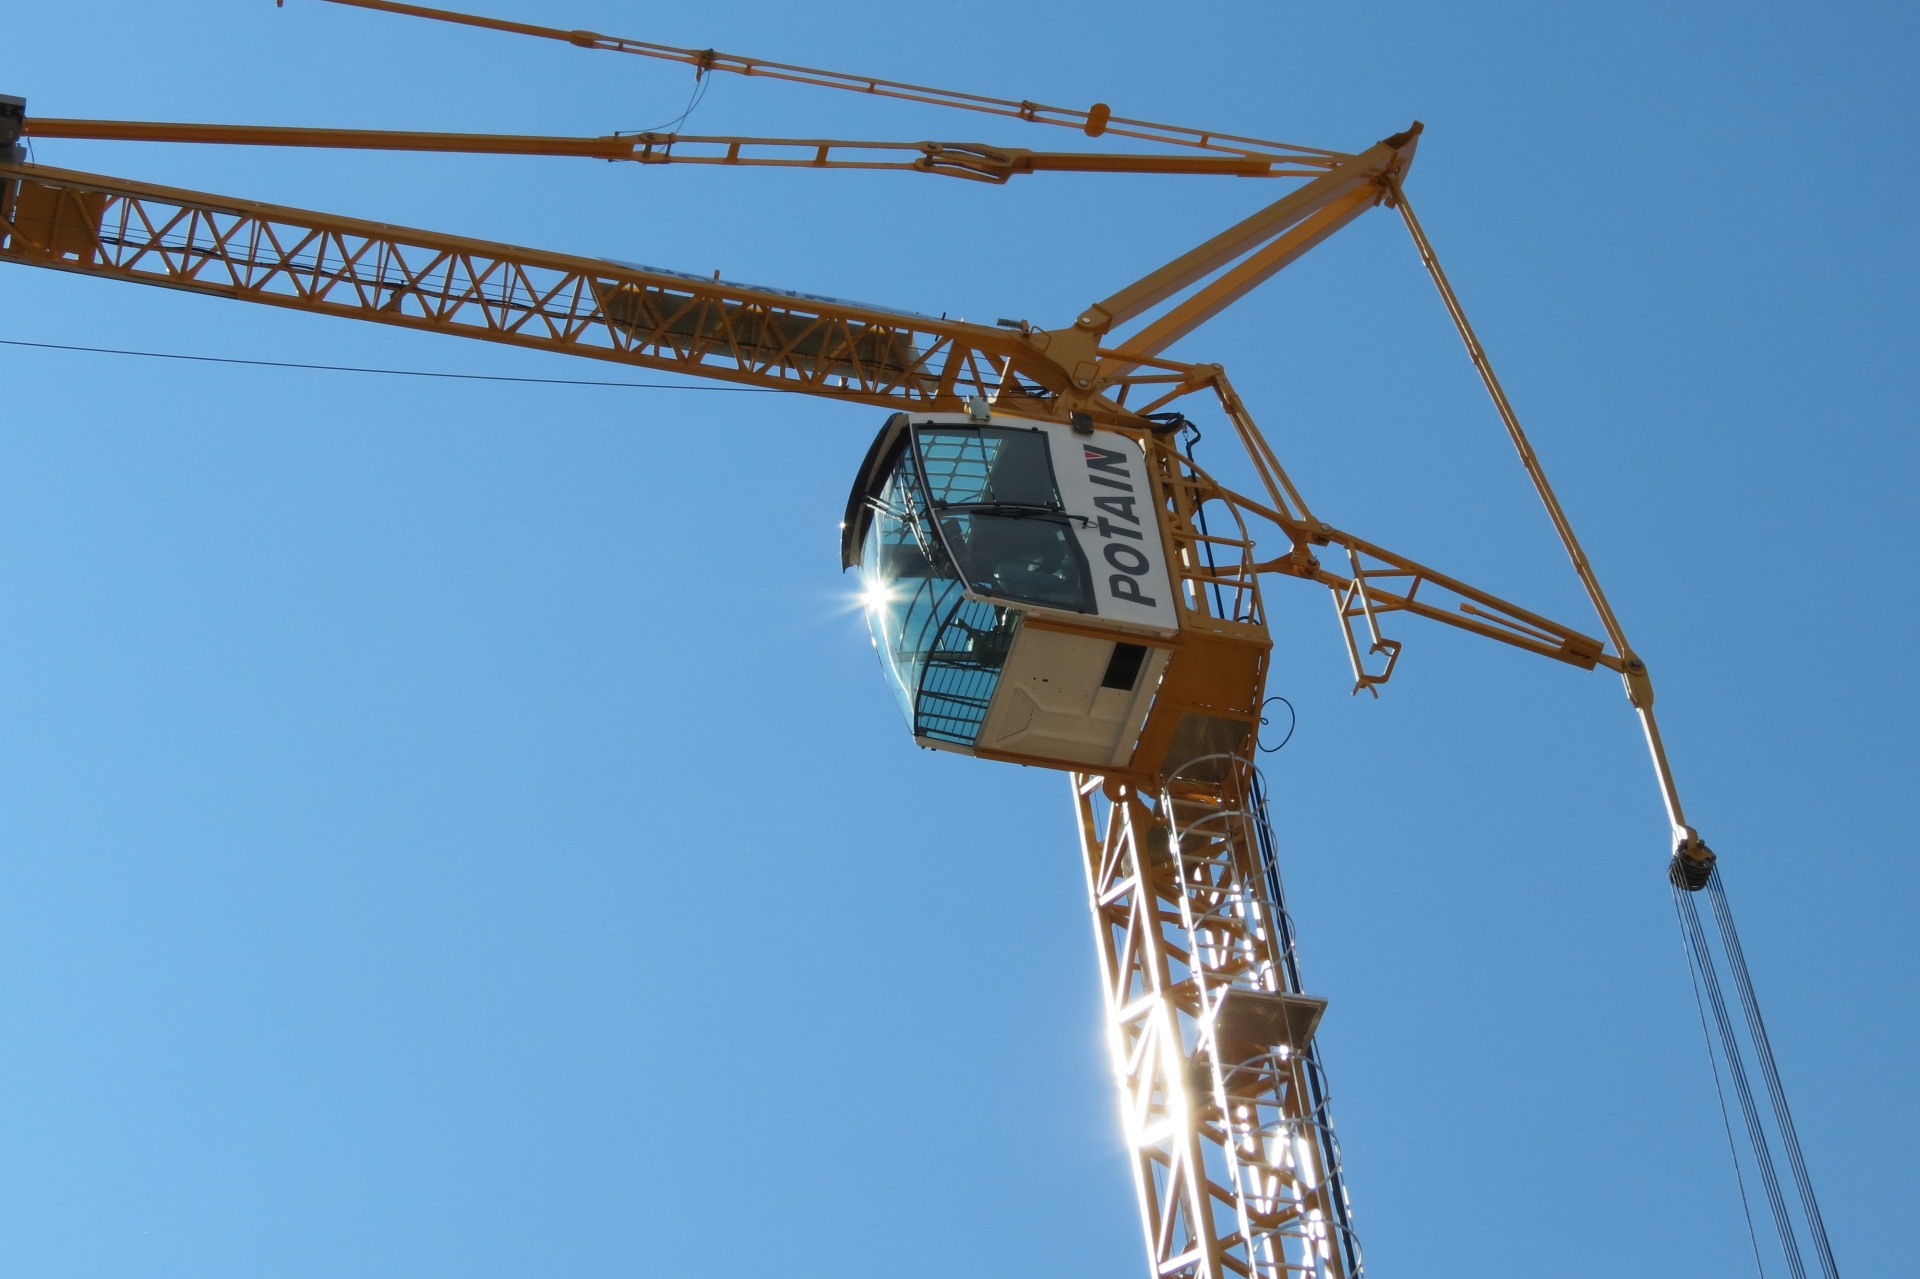 Potain-introduces-the-new-Igo-T-99-self-erecting-crane-with-improved-reach-and-capacity-from-a-compact-footprint-4.jpg